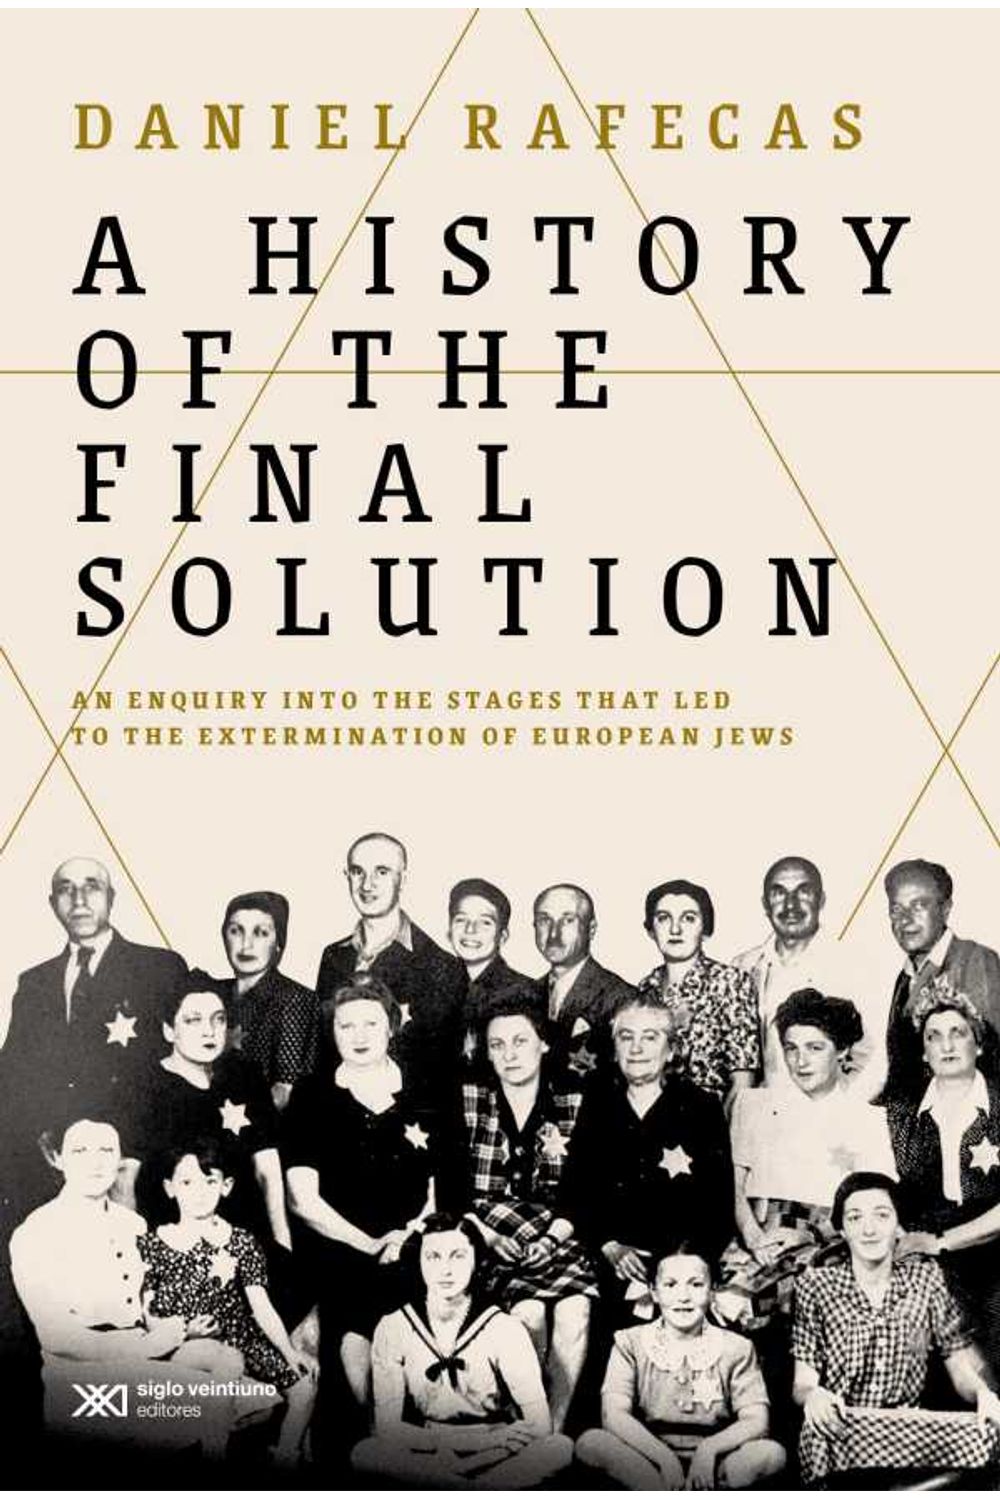 bw-a-history-of-the-final-solution-siglo-xxi-editores-9789878011257